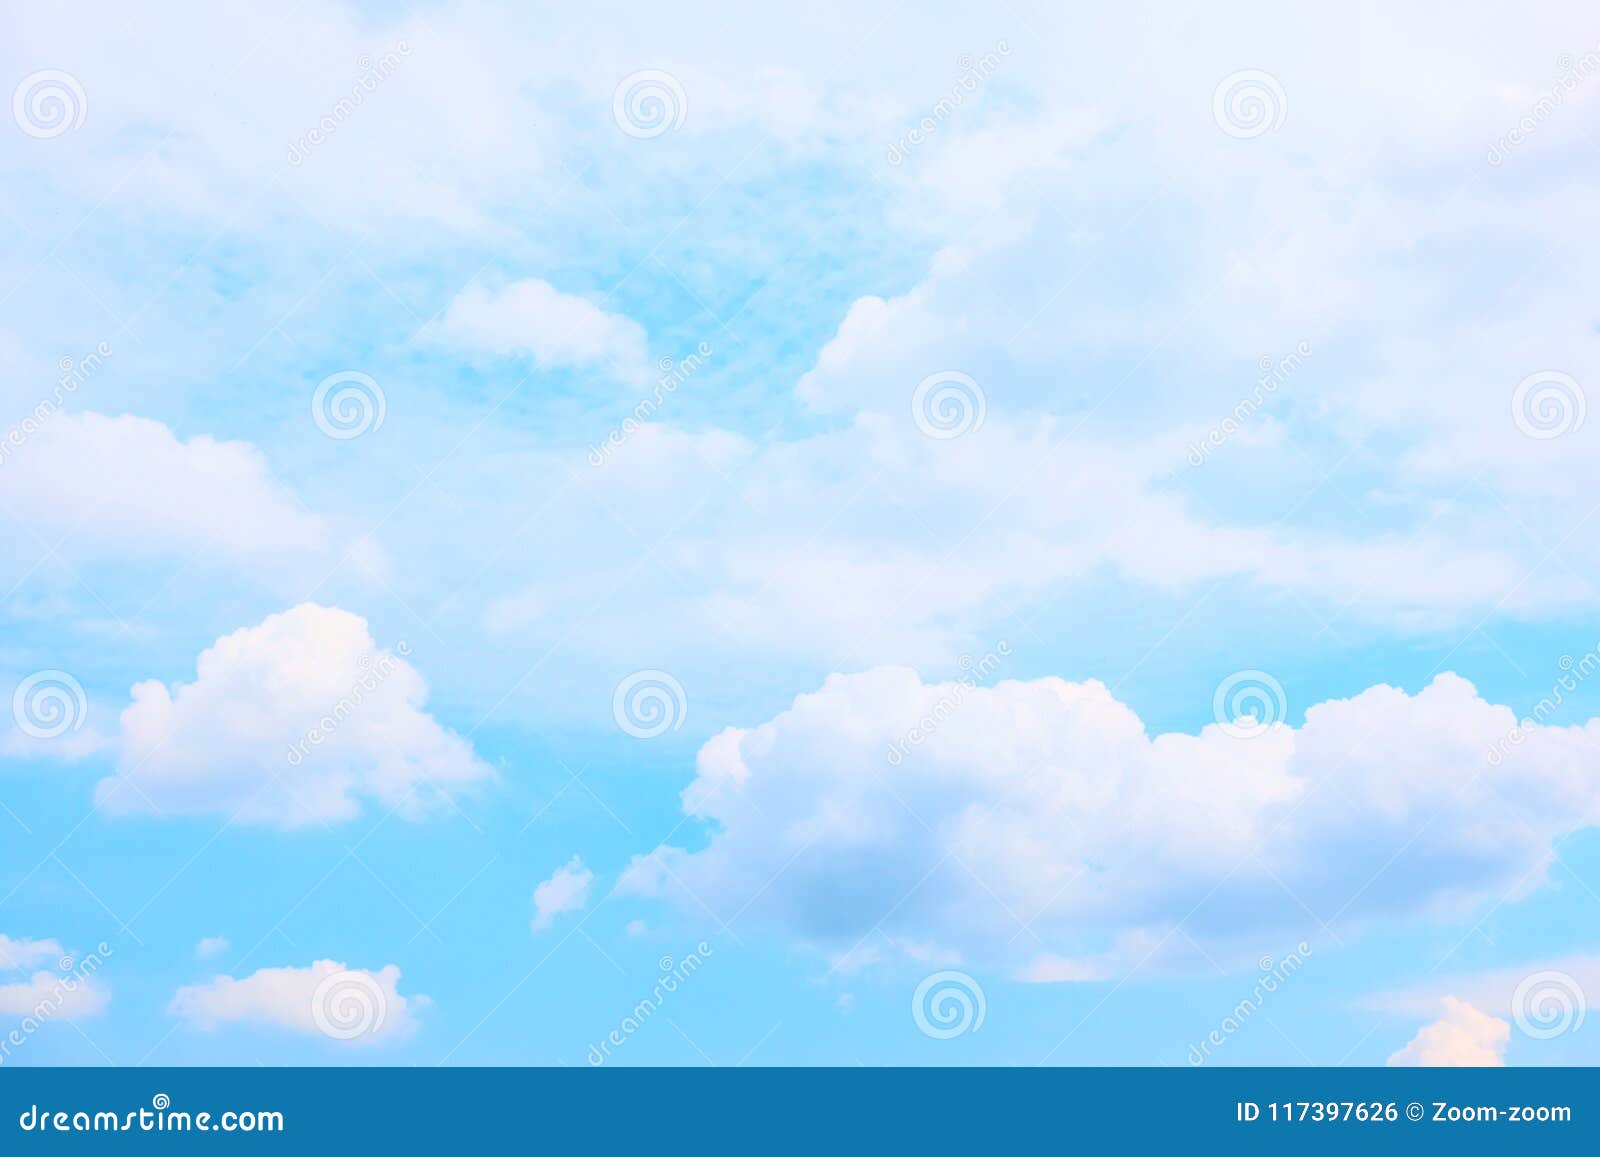 Light Blue Sky And White Clouds Stock Photo Image Of Horizontal Blue